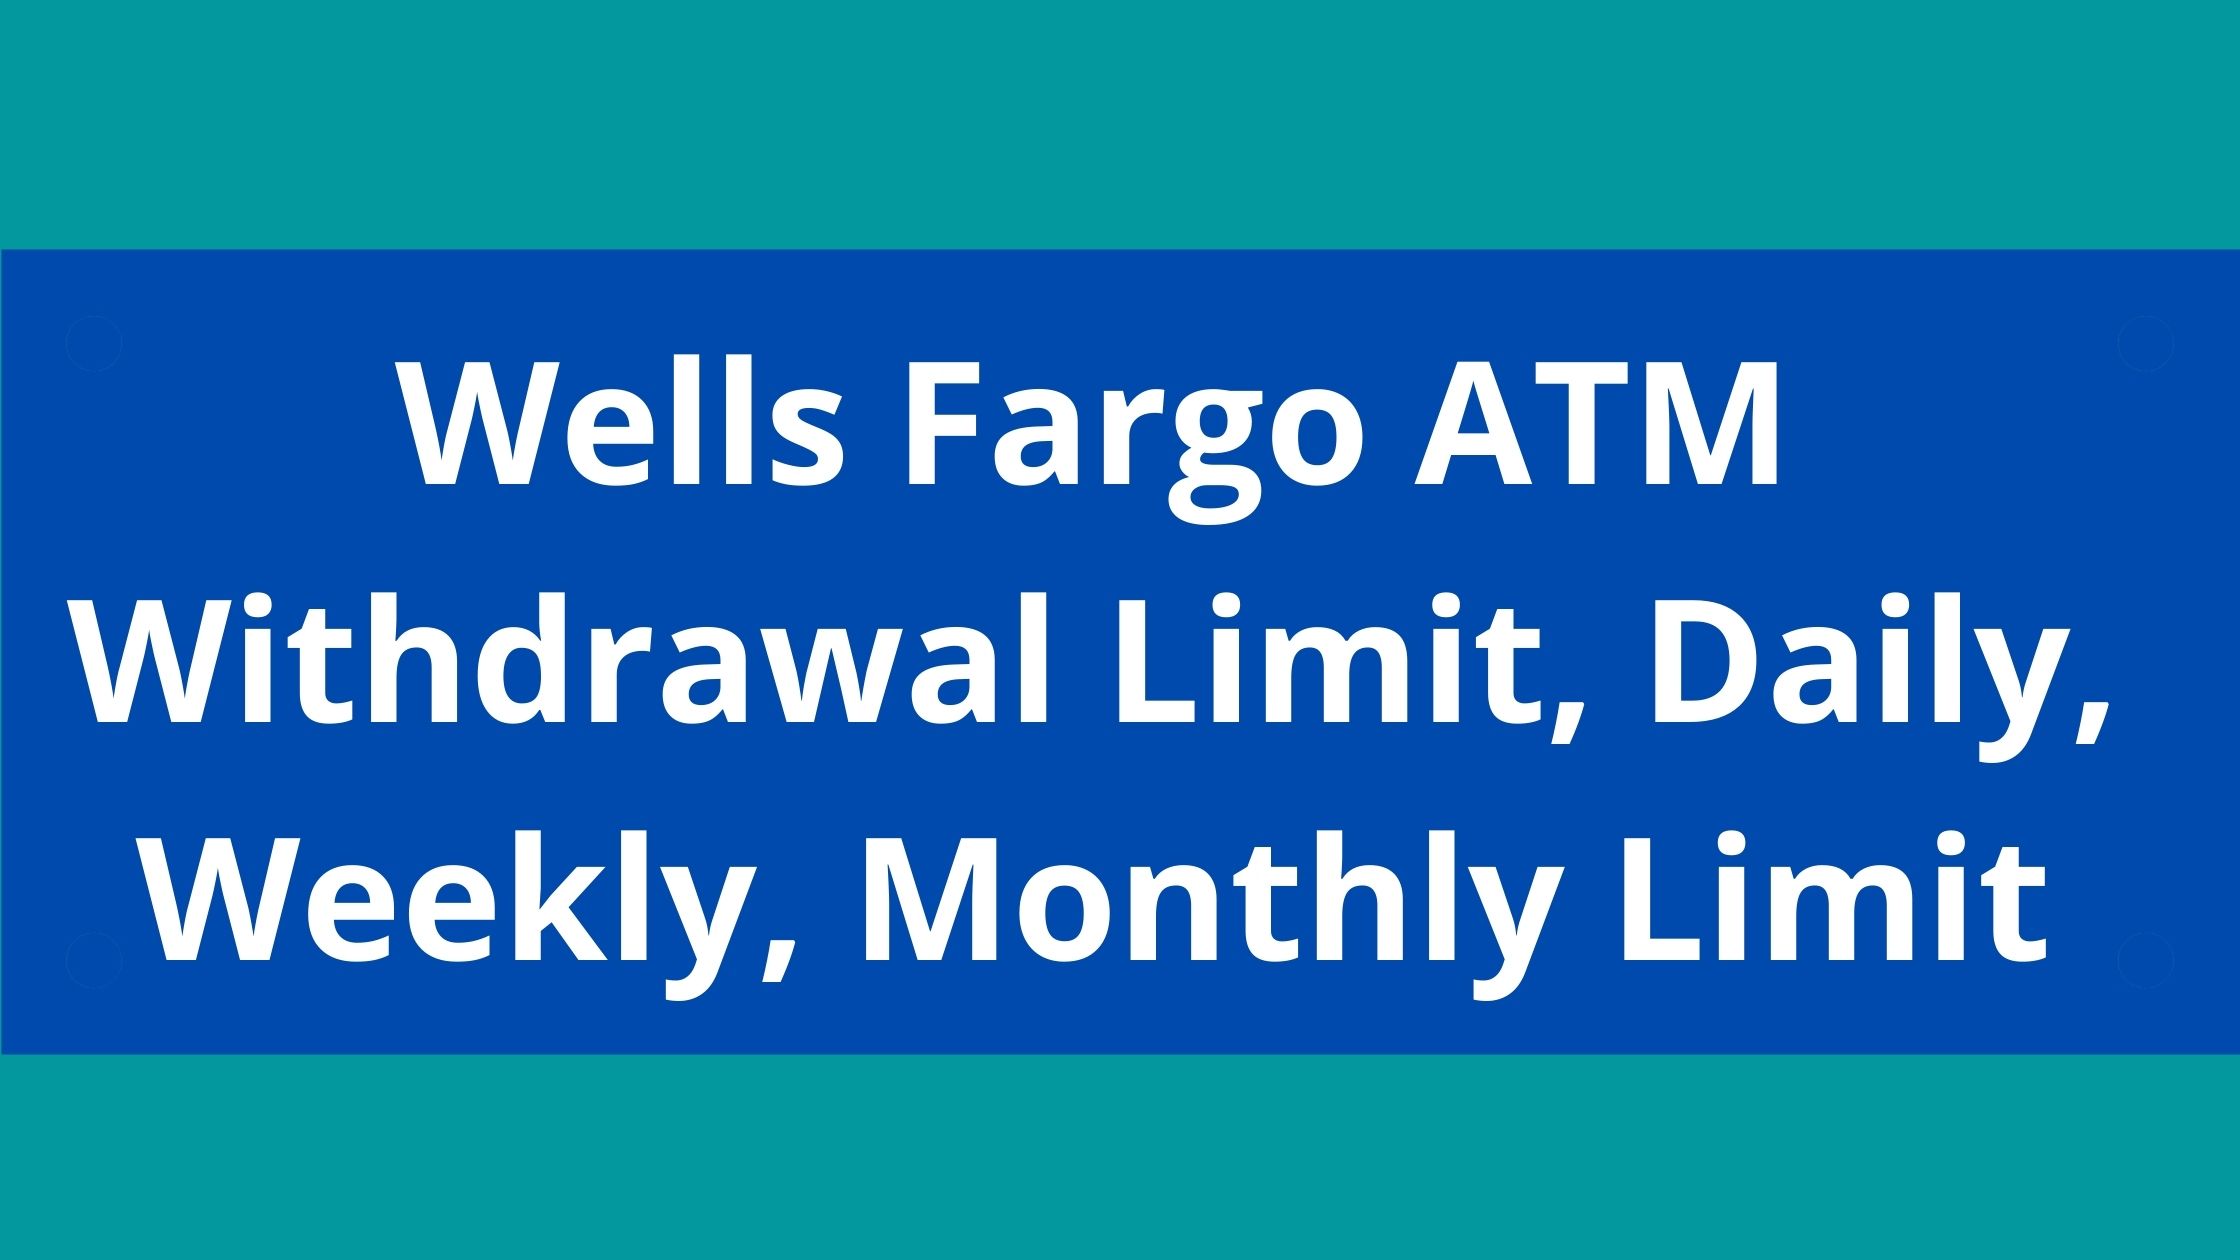 Wells Fargo ATM Withdrawal Limit, Daily, Weekly, Monthly Limit